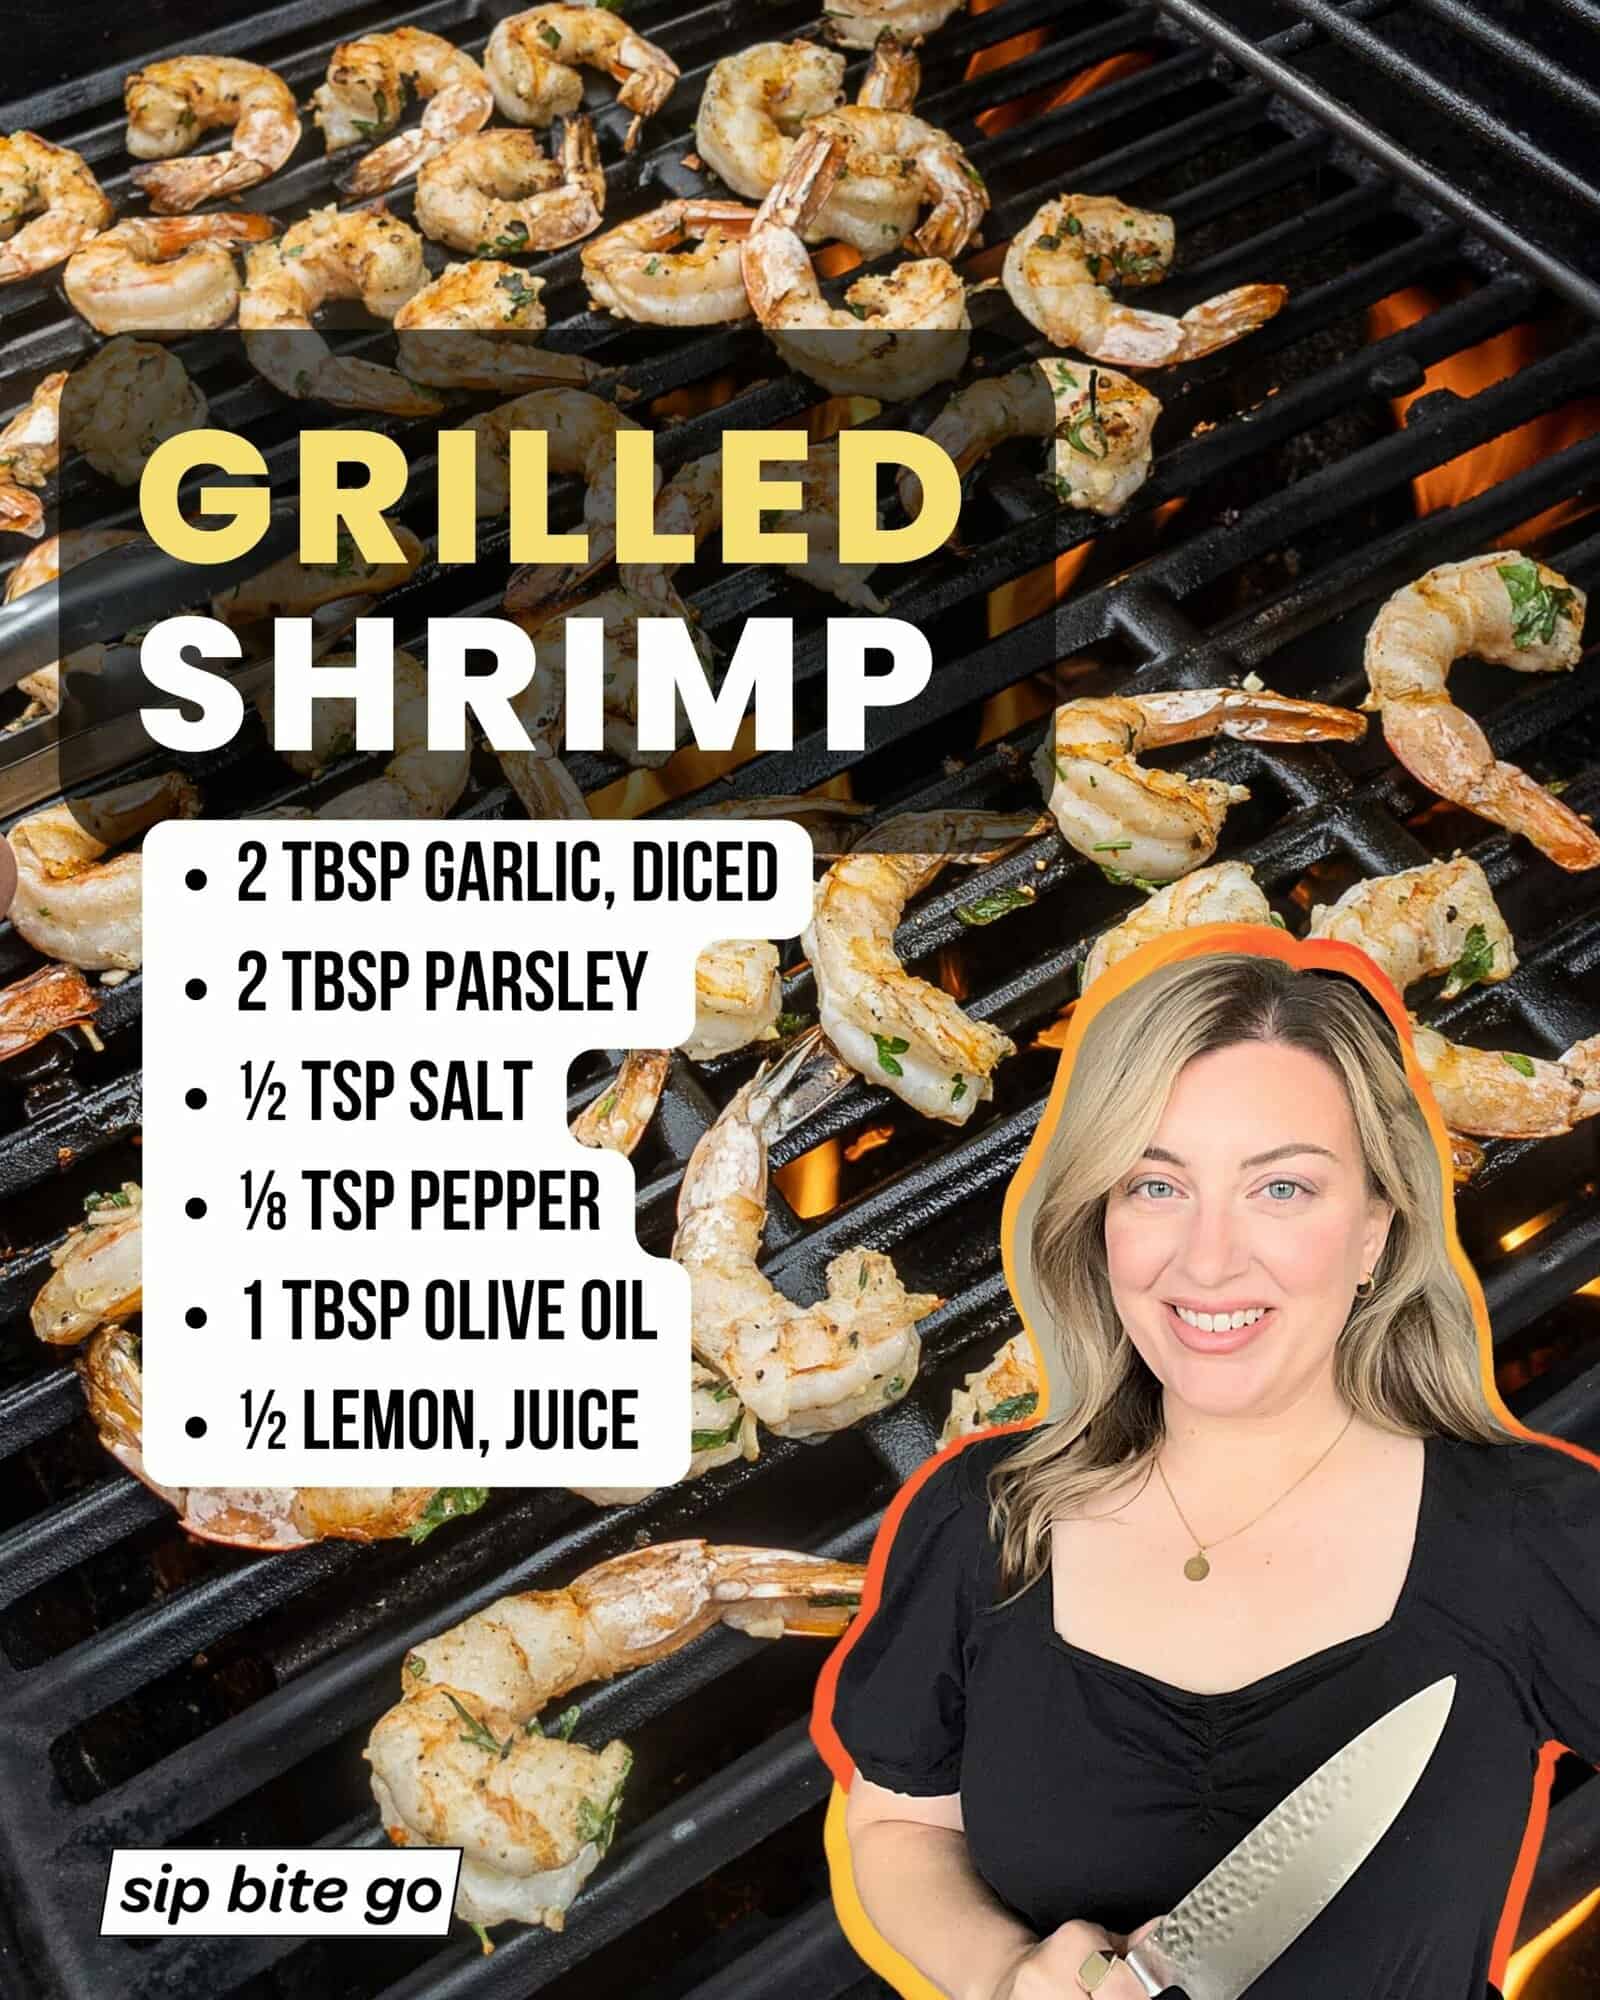 Infographic with ingredients for grilling jumbo shrimp on the gas grill from Weber with Jenna Passaro and Sip Bite Go logo